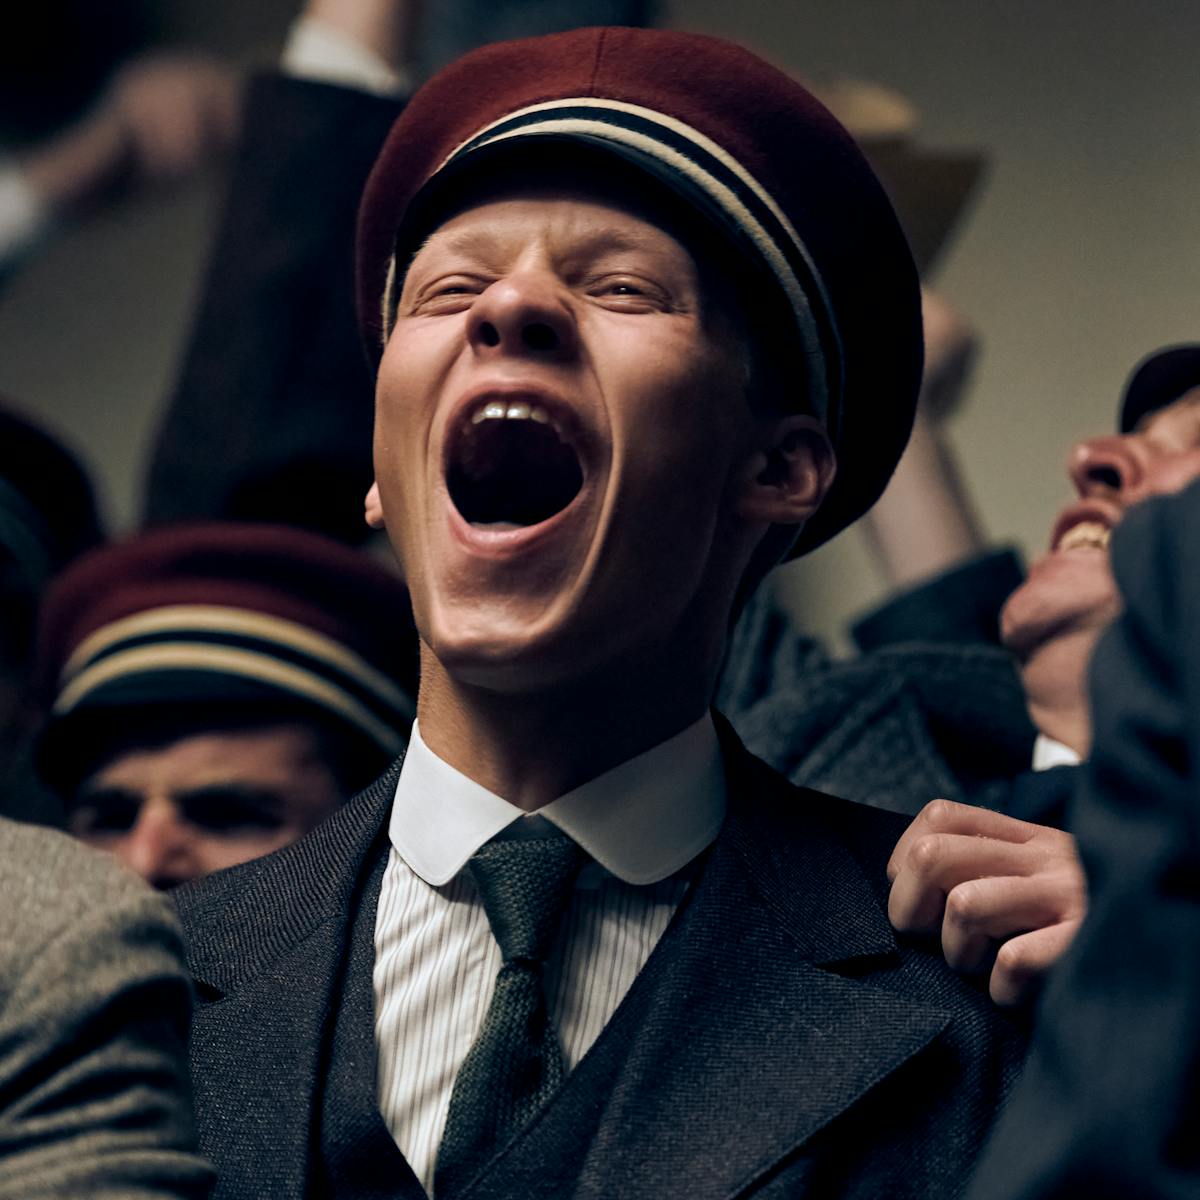 Paul Bäumer (Felix Kammerer) wears a black suit and tie, and a red hat. His mouth is wide open as he cheers, in a pack of other cheering men. 